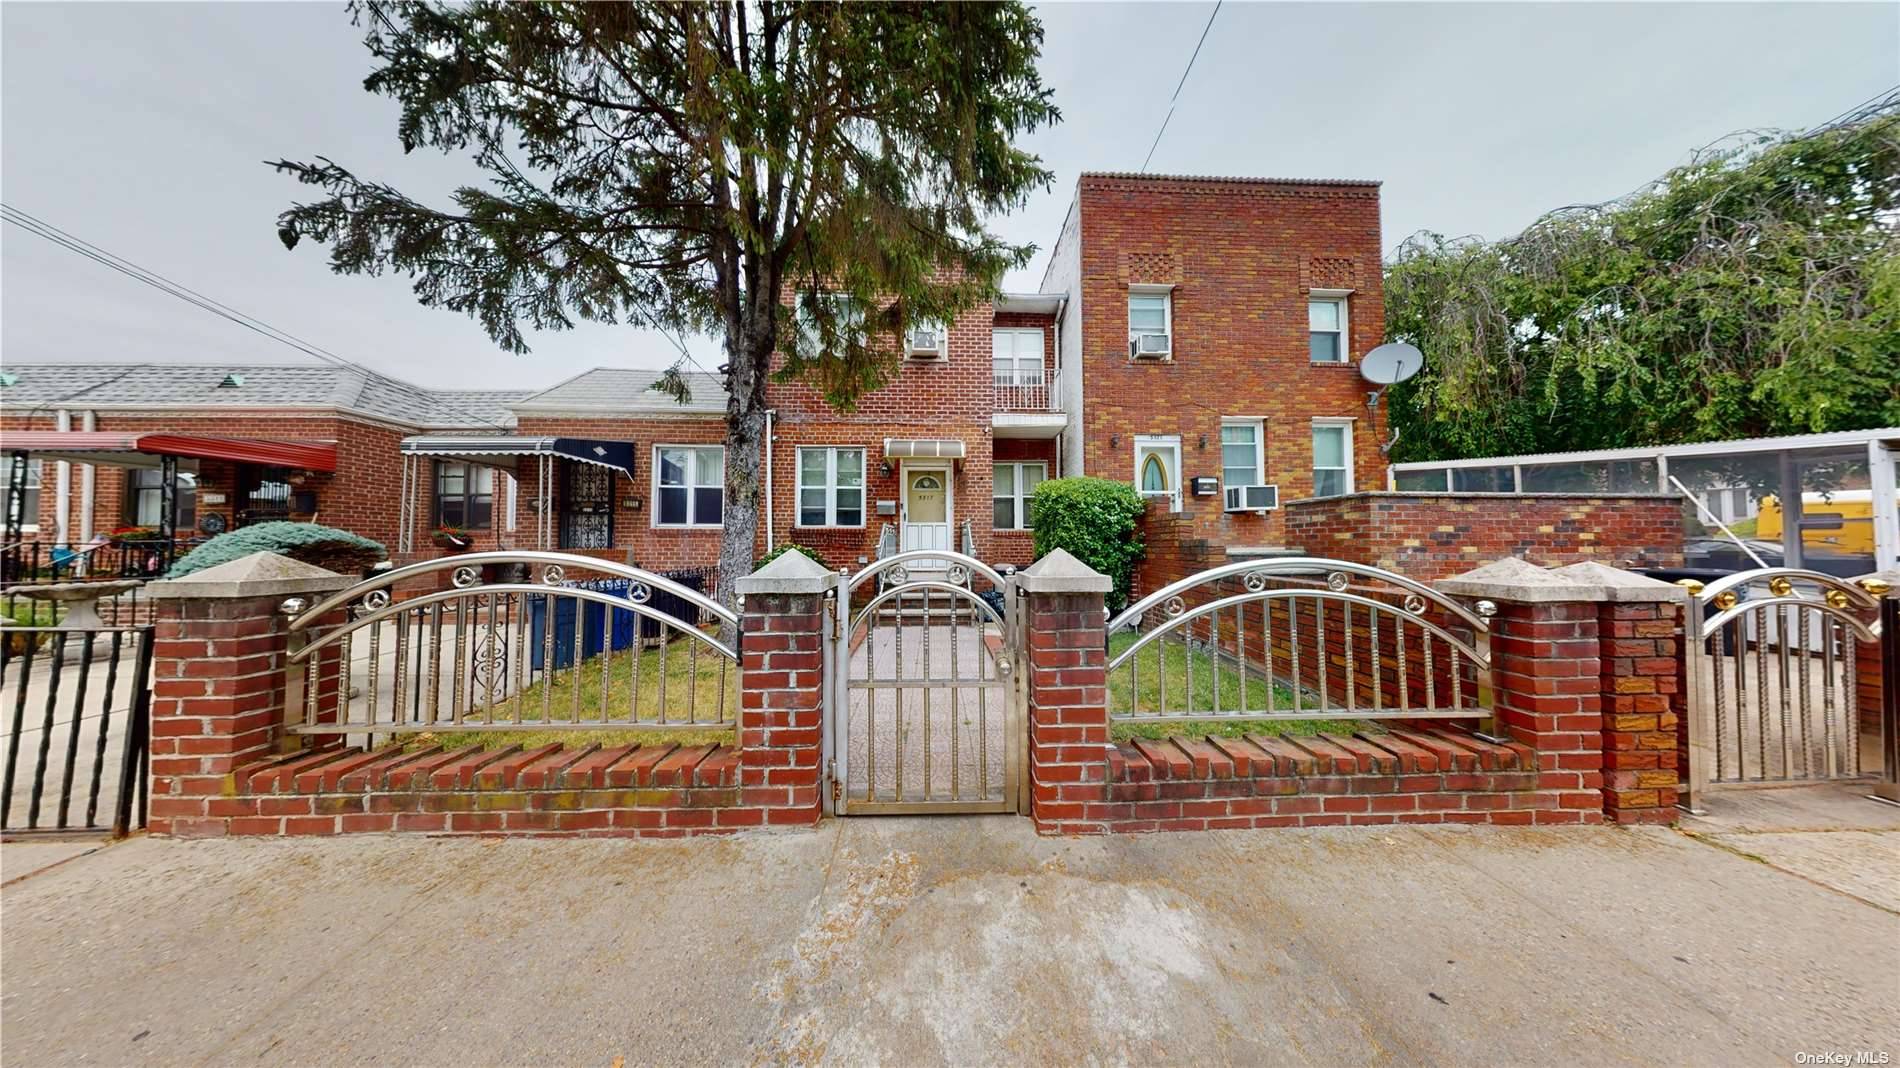 Welcome to this Single family Brick home in Old Mill Basin, Brooklyn !